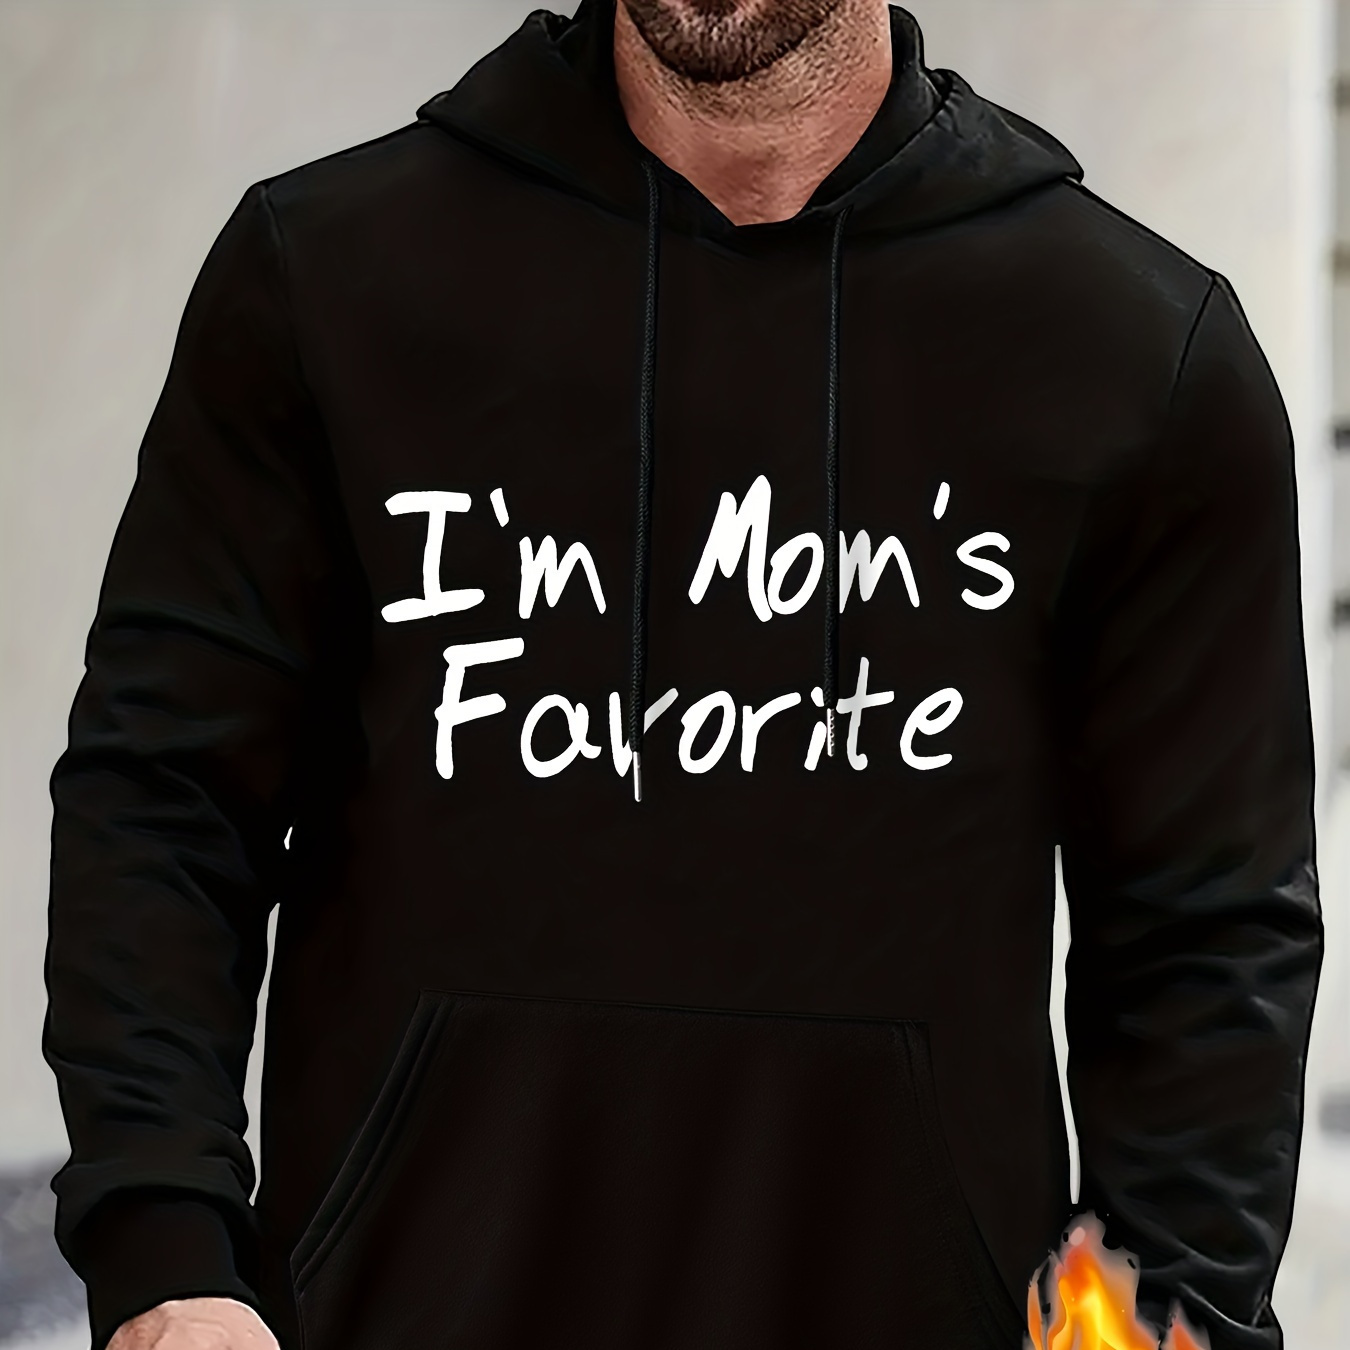 

i Am Mom's Favorite " Print Men's Warm Pullover Round Neck Hooded Sweatshirt Print Hoodie Casual Top For Autumn Winter Men's Clothing As Gifts